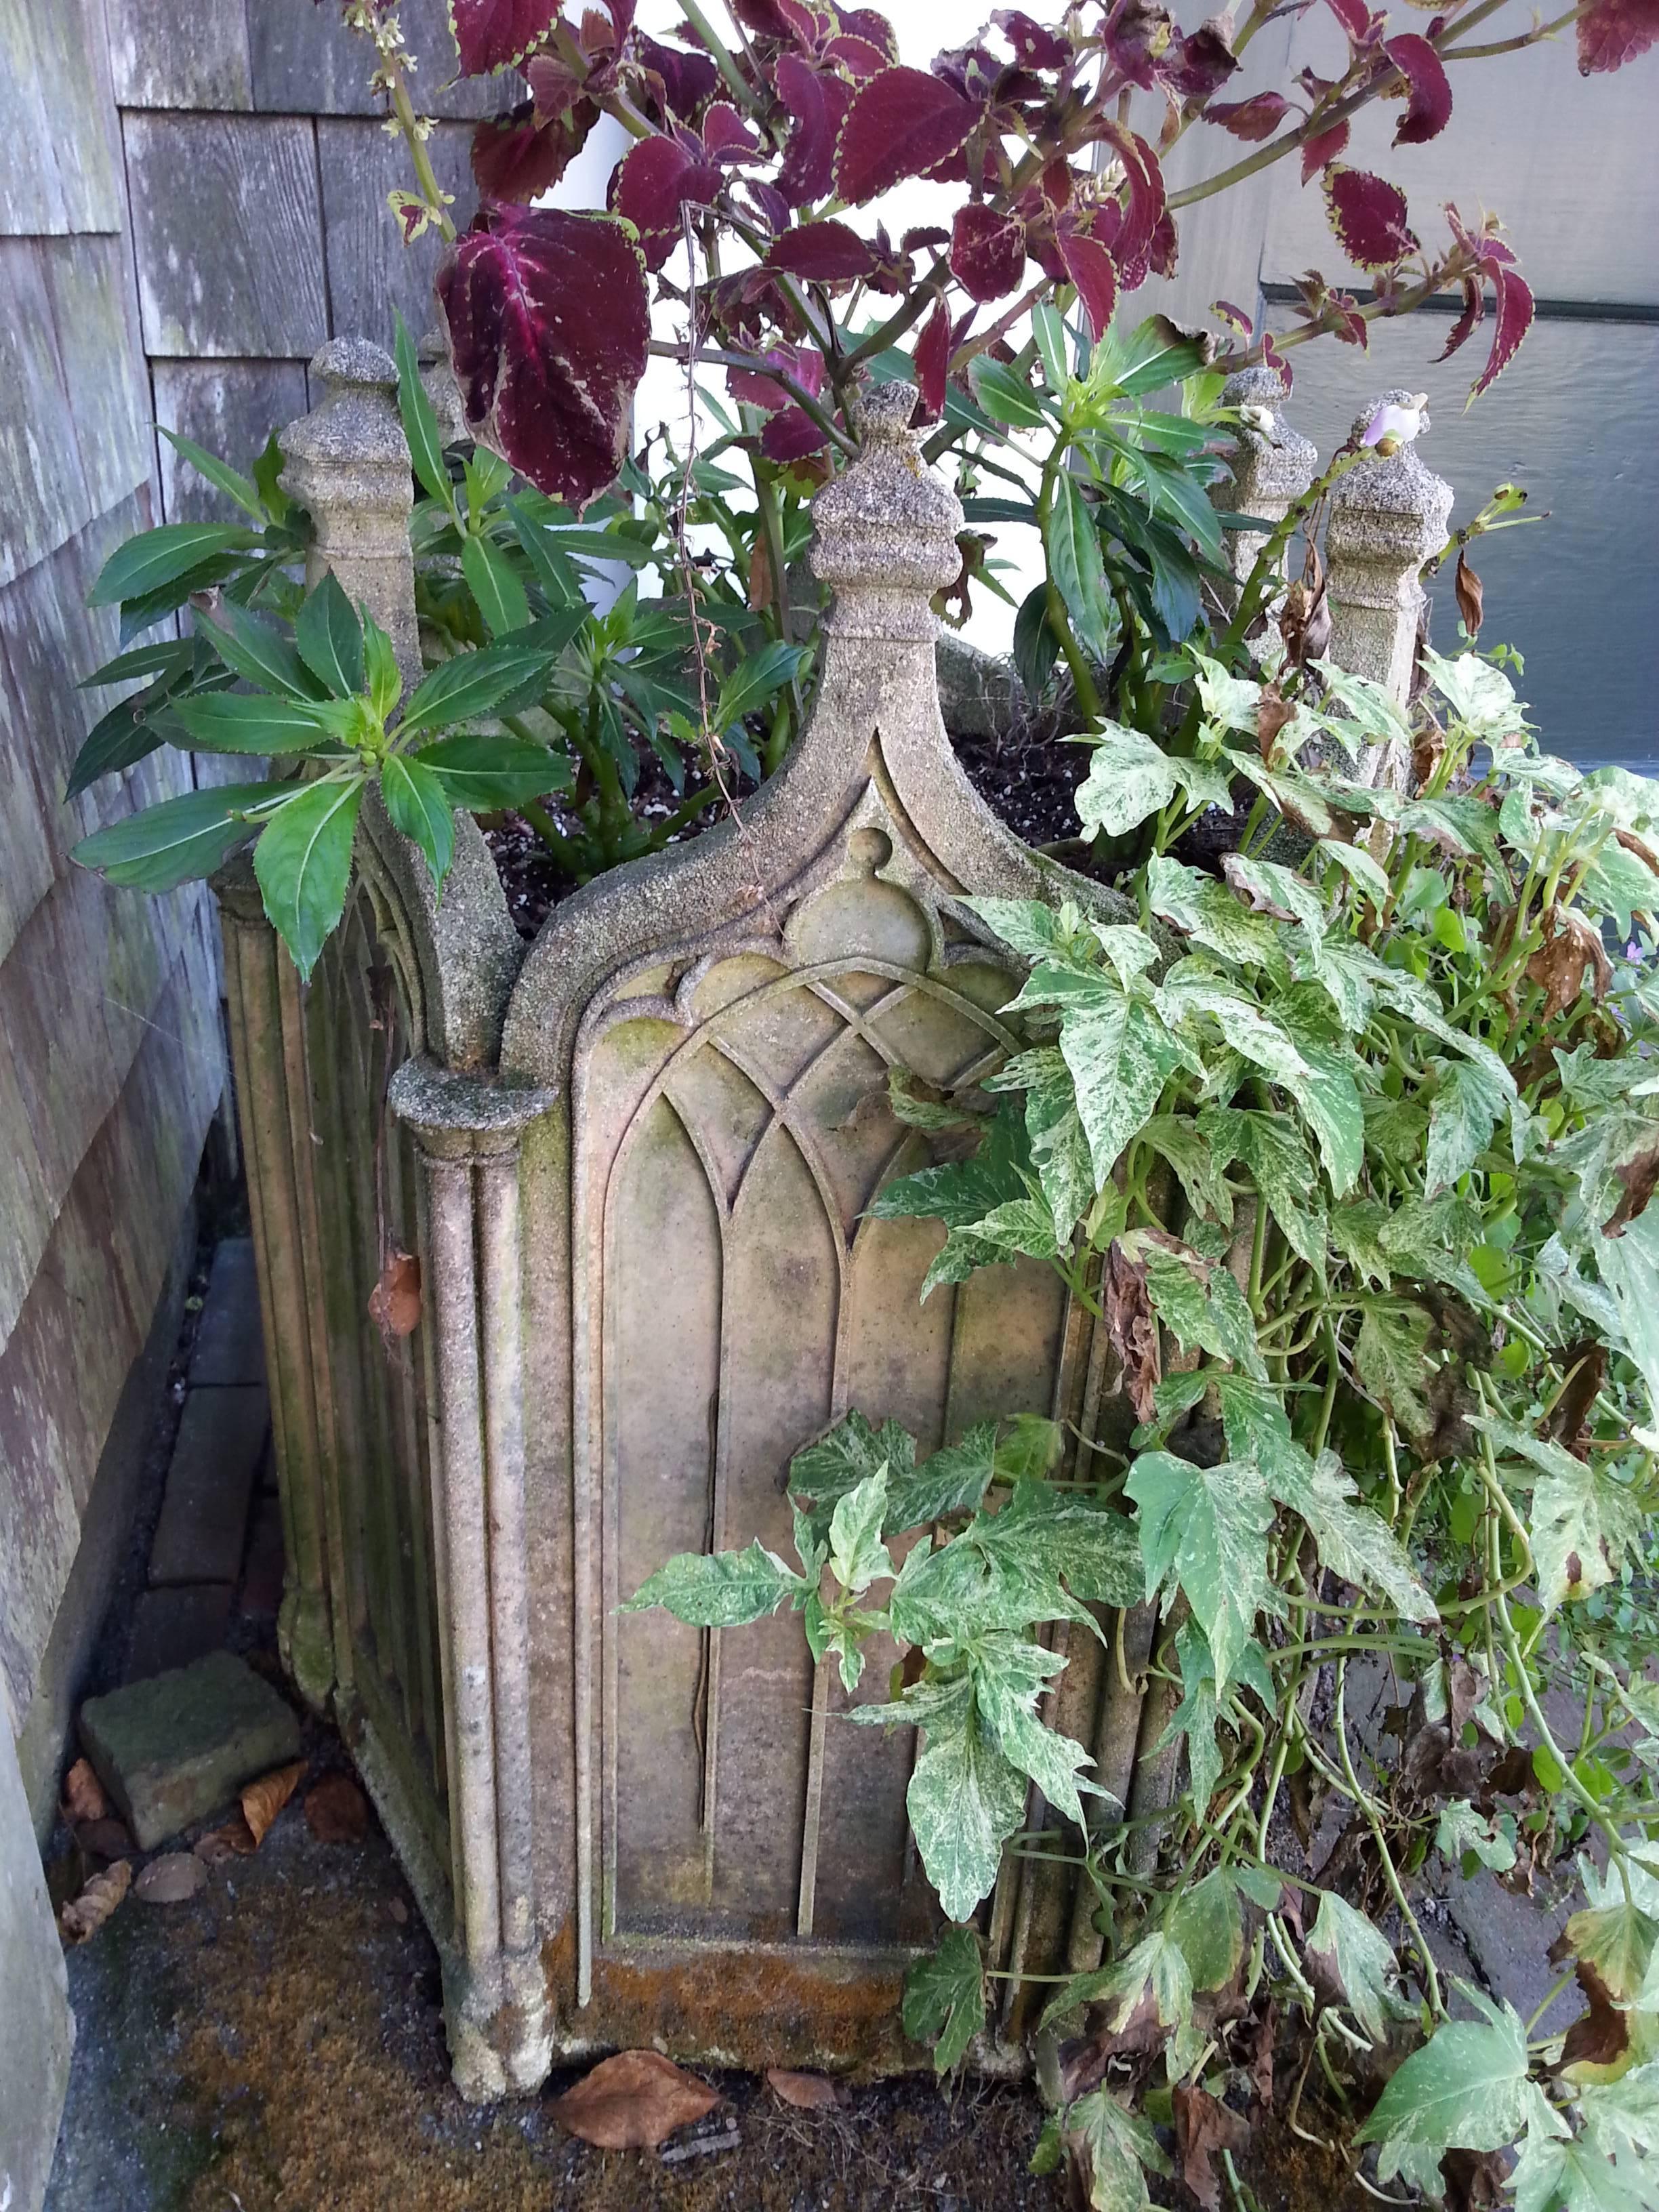 Gothic concrete planter. 6 sides, beautifully aged.